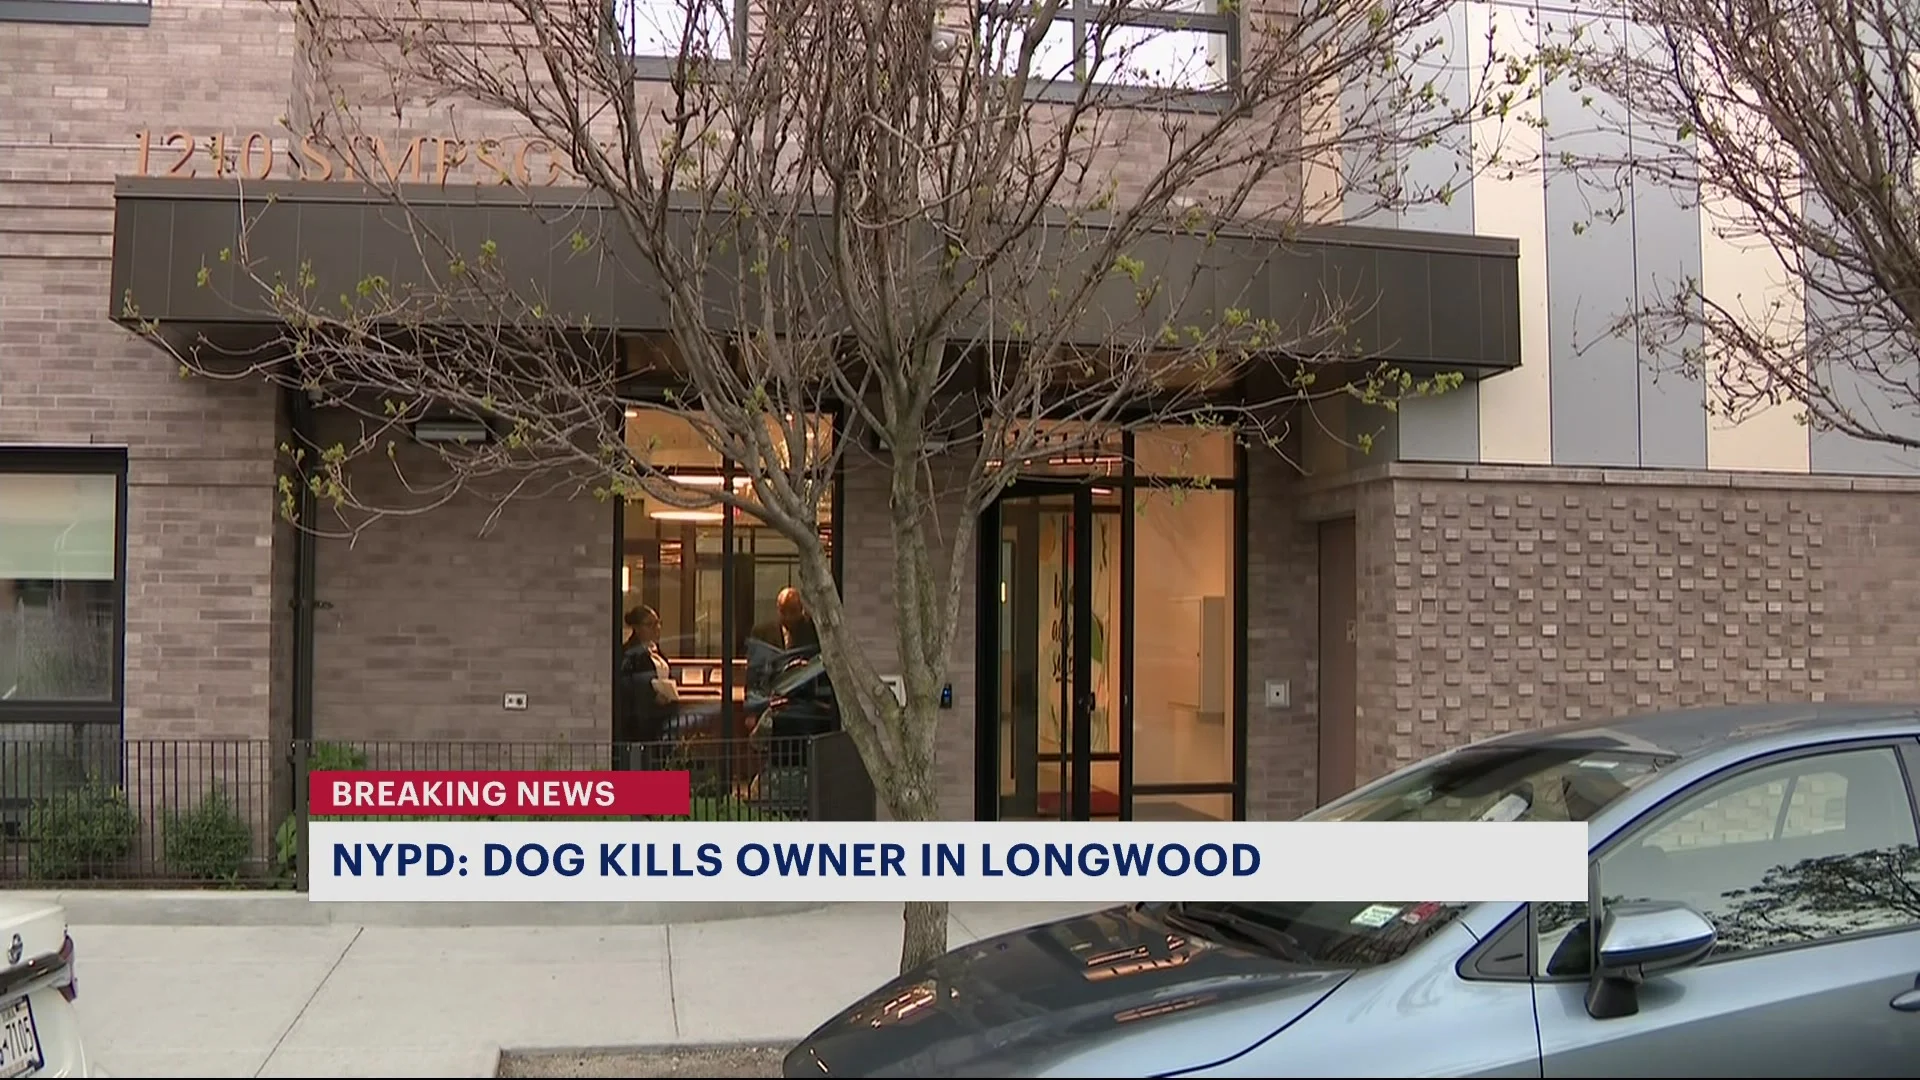 Authorities: 41-year-old man killed by his own dog in Longwood